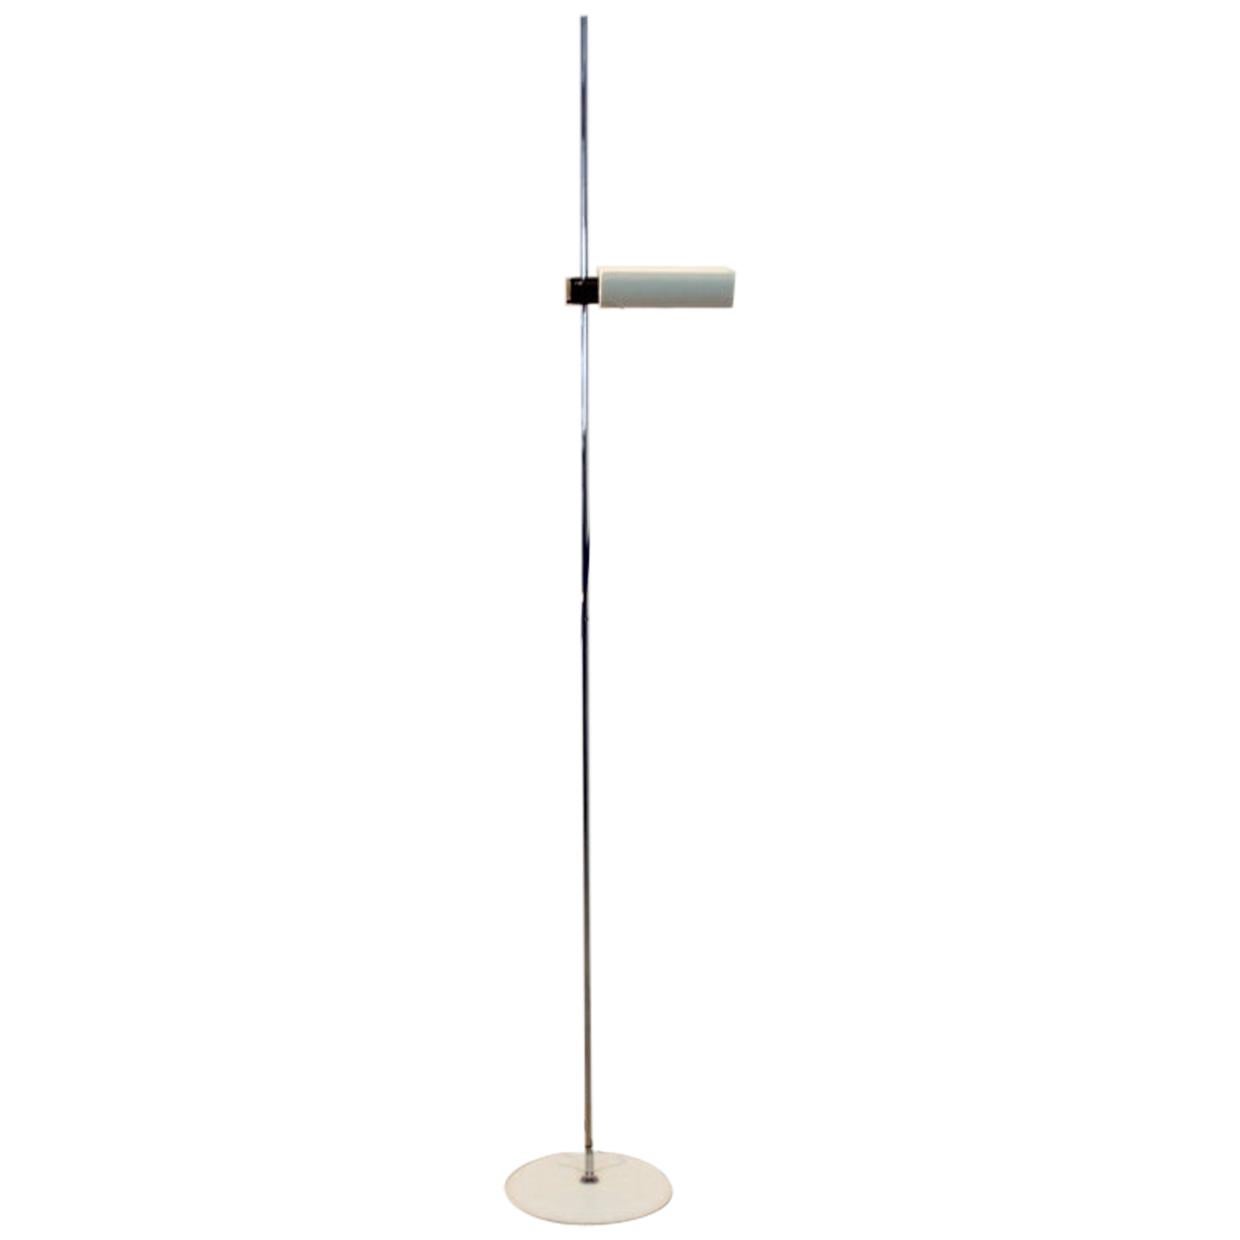 DIM 333 Floor Lamp by Vico Magistretti for Oluce, Italy, 1970s